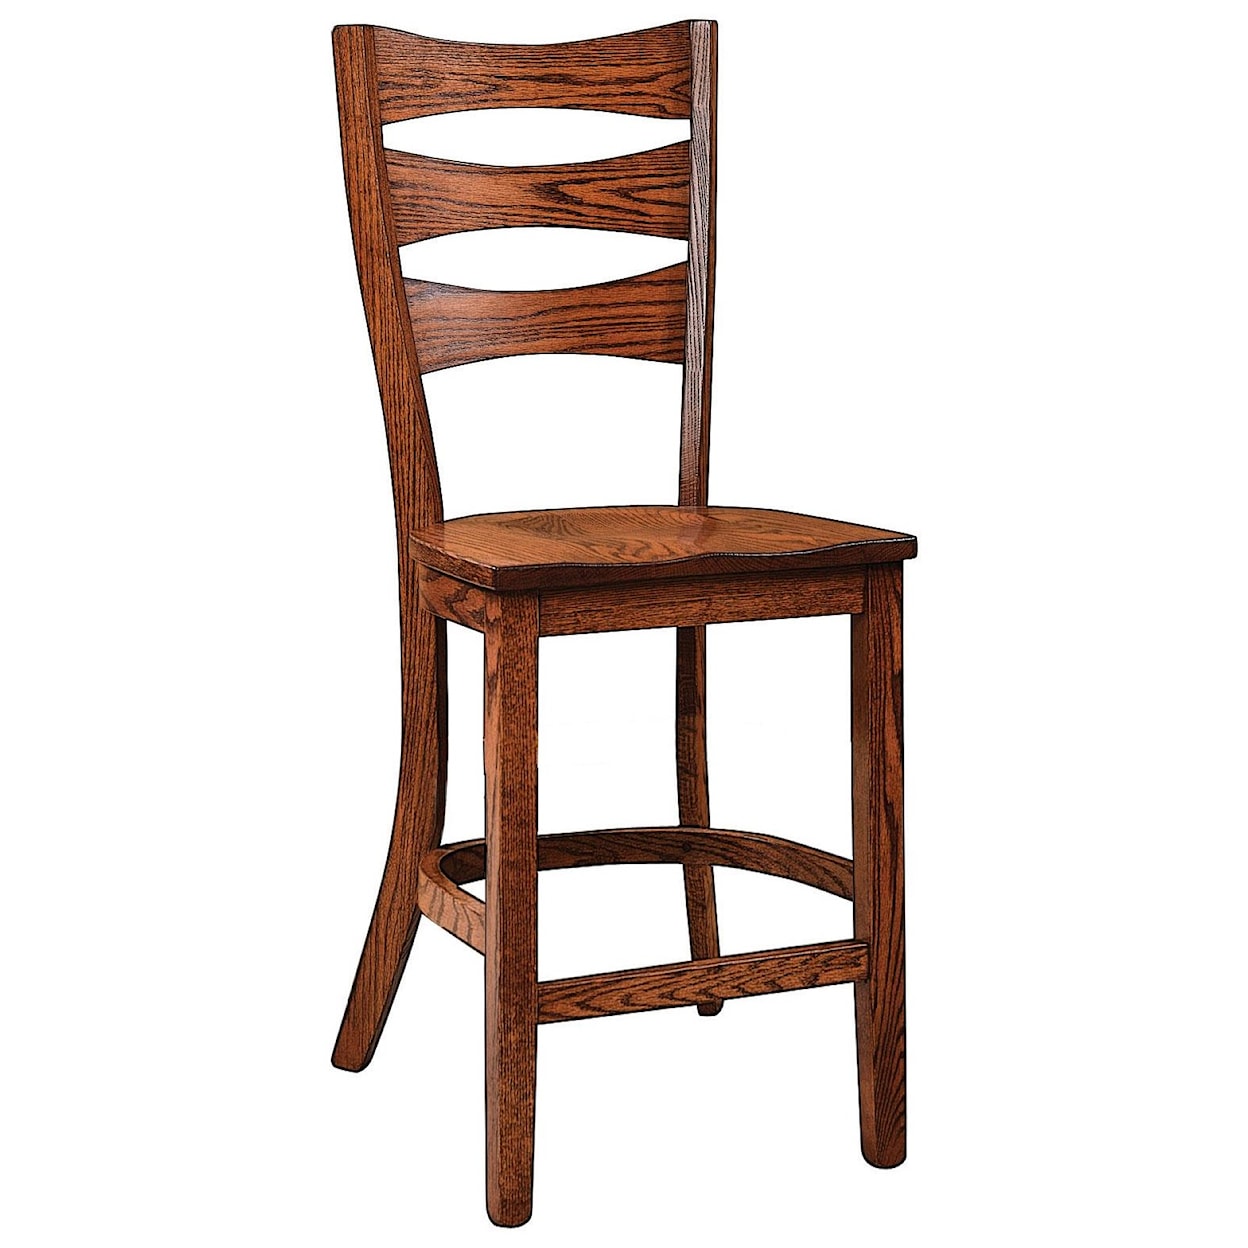 Wengerd Wood Products Sierra 30" Stationary Stool